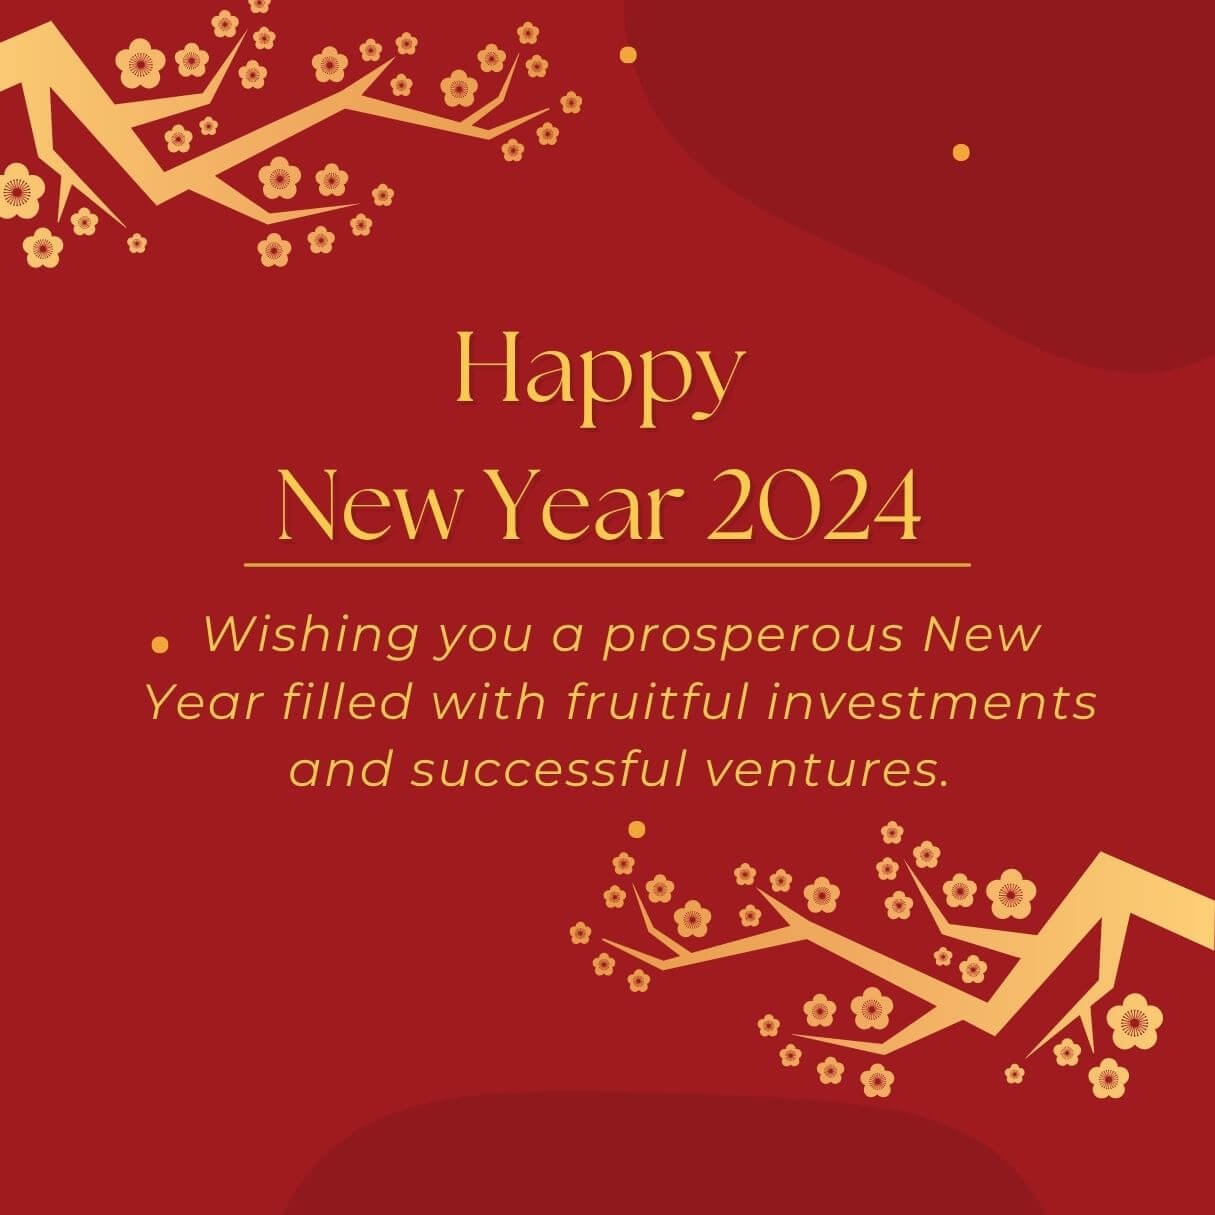 Red 2024 New Year Wishes For Entrepreneurs